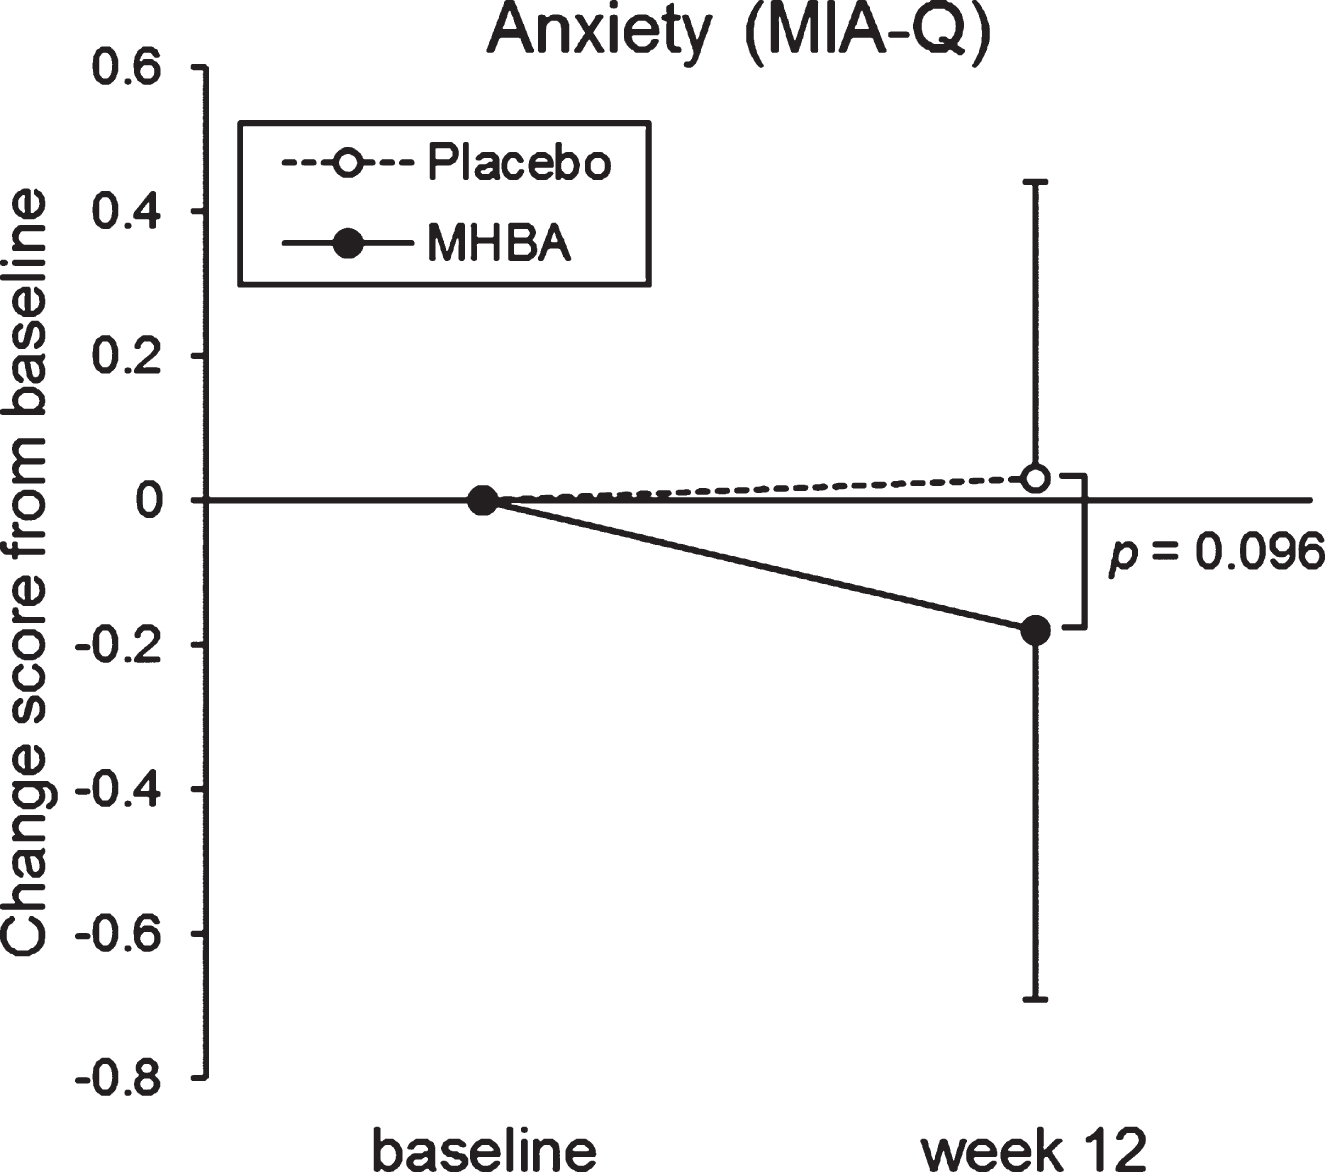 Changes in anxiety score in the MIA-Q at baseline and week twelve. The solid line indicates the MHBA group (n = 49) and the dotted line indicates the placebo group (n = 49). Data points represent means and error bars indicate SD. p-value shows between-group differences performed using Mann–Whitney U tests.